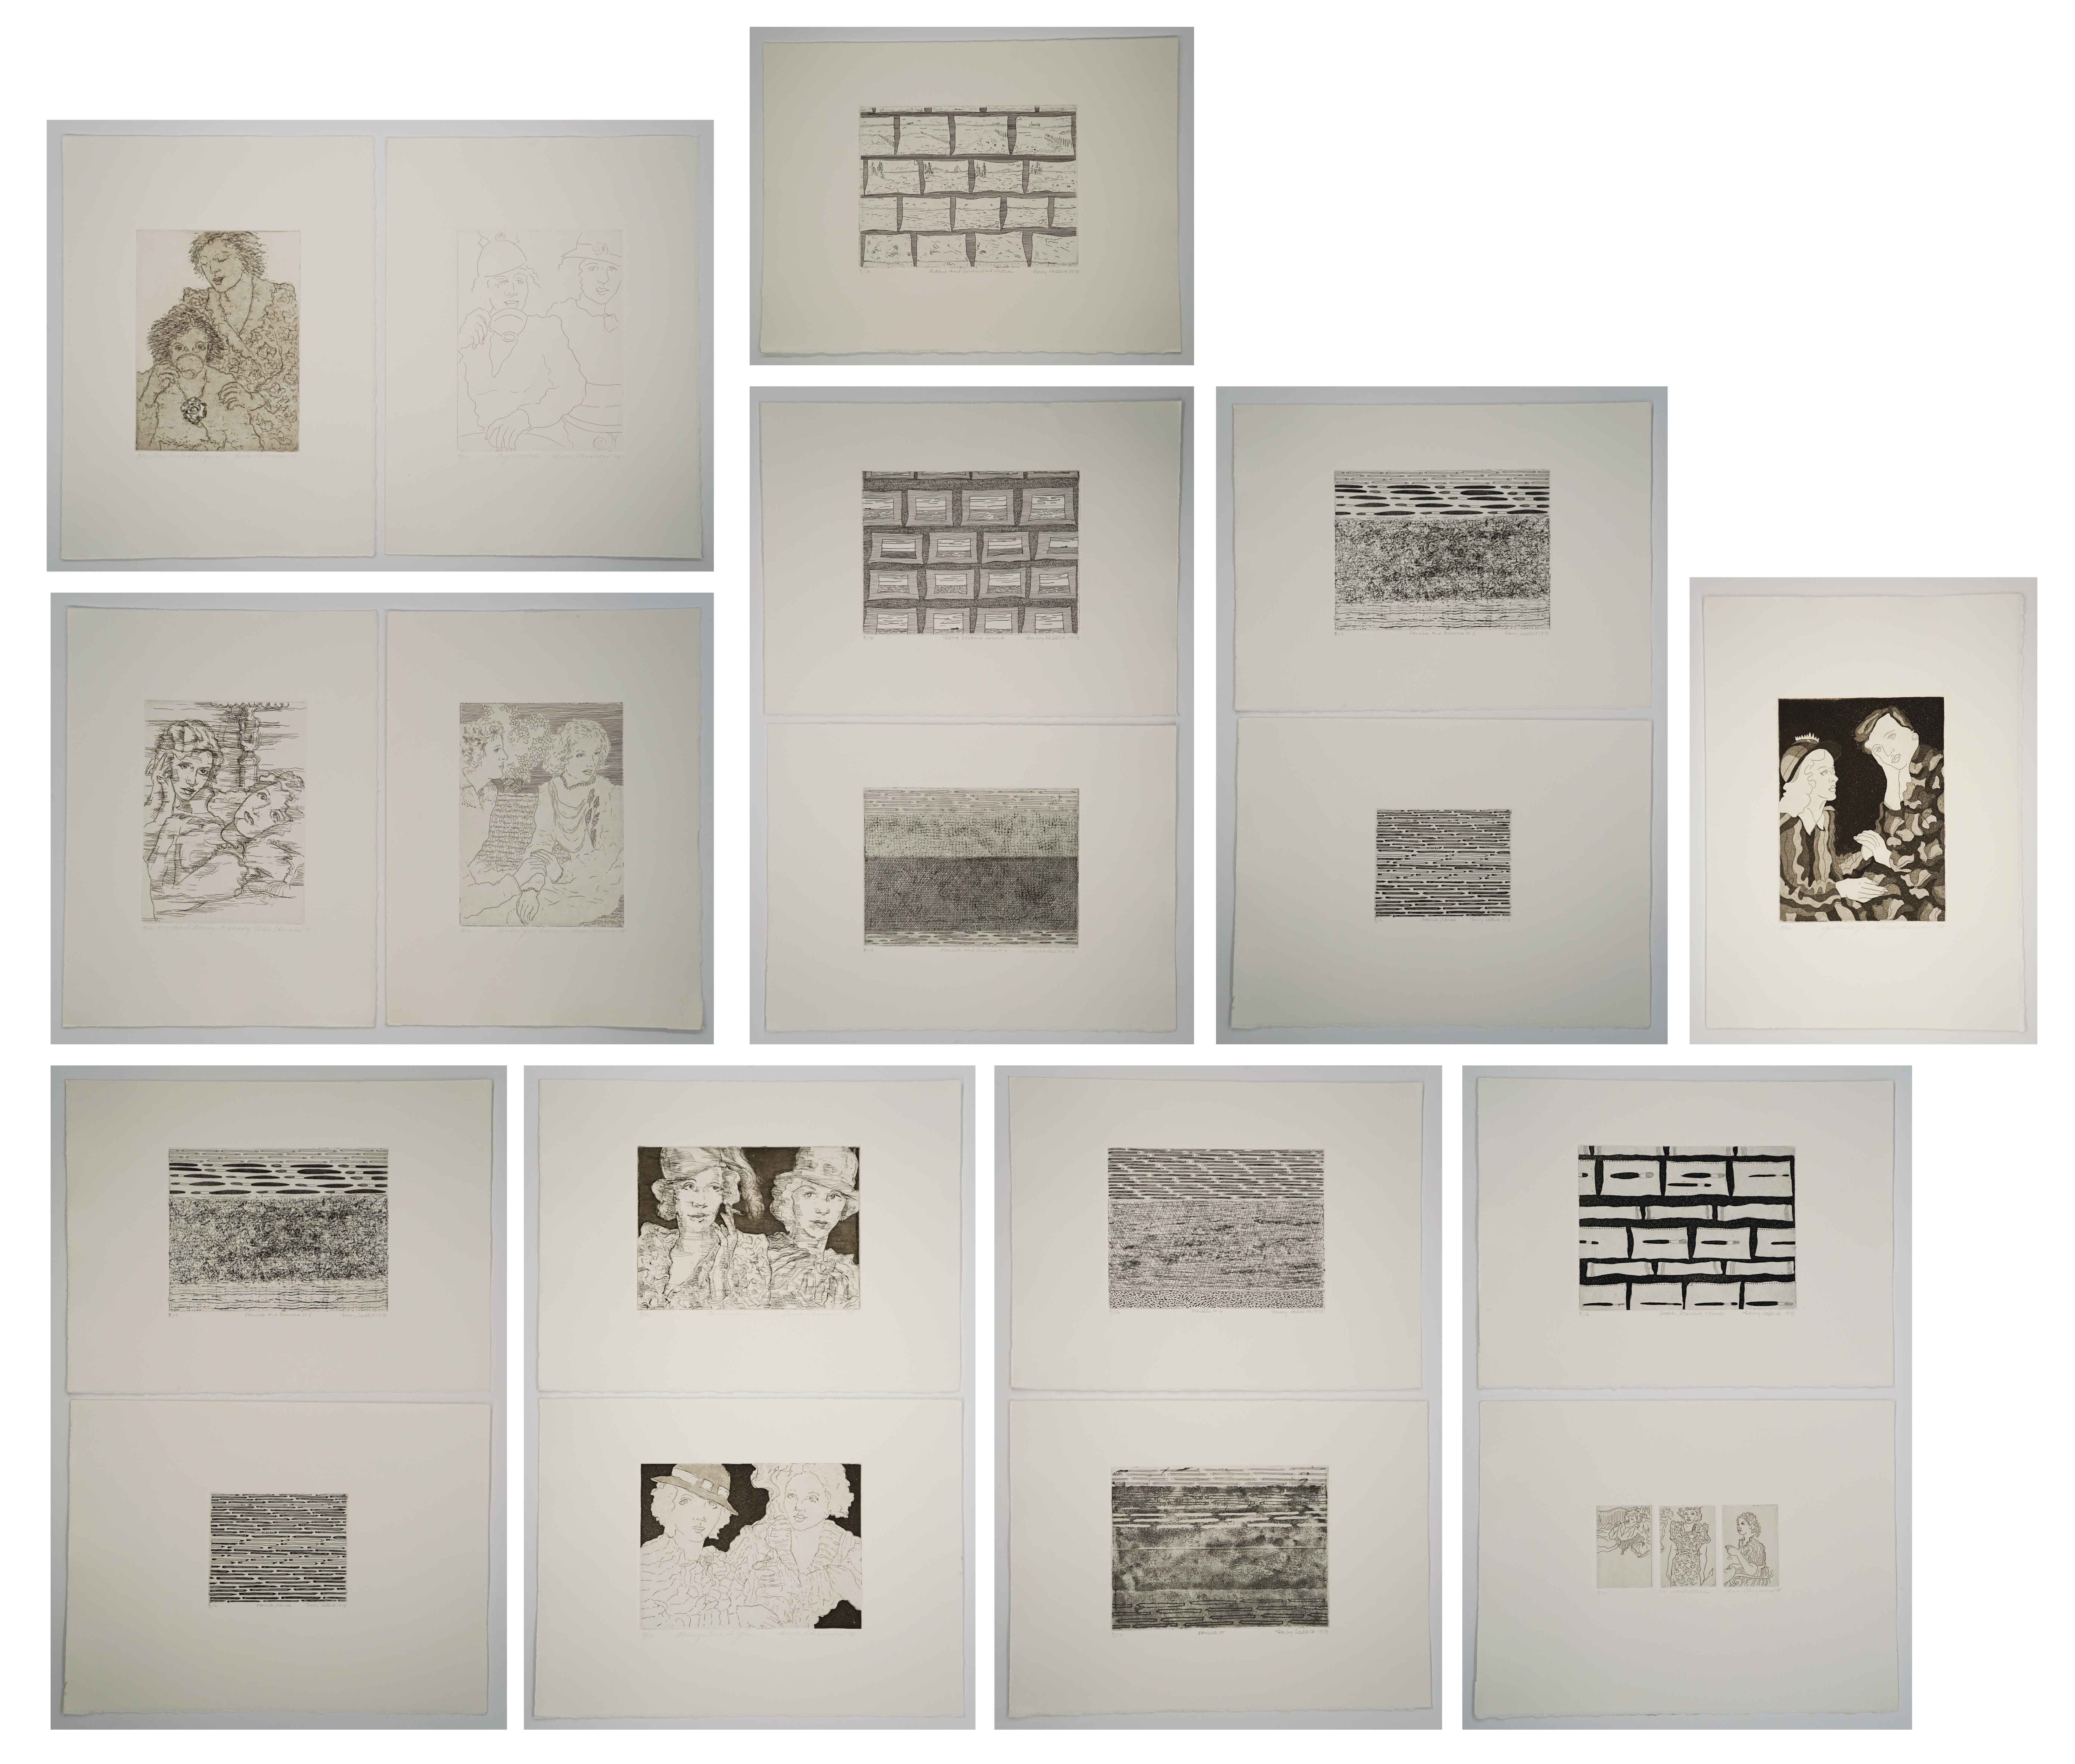 A. Chernow/L. Sallick Etchings [Women, Abstract]